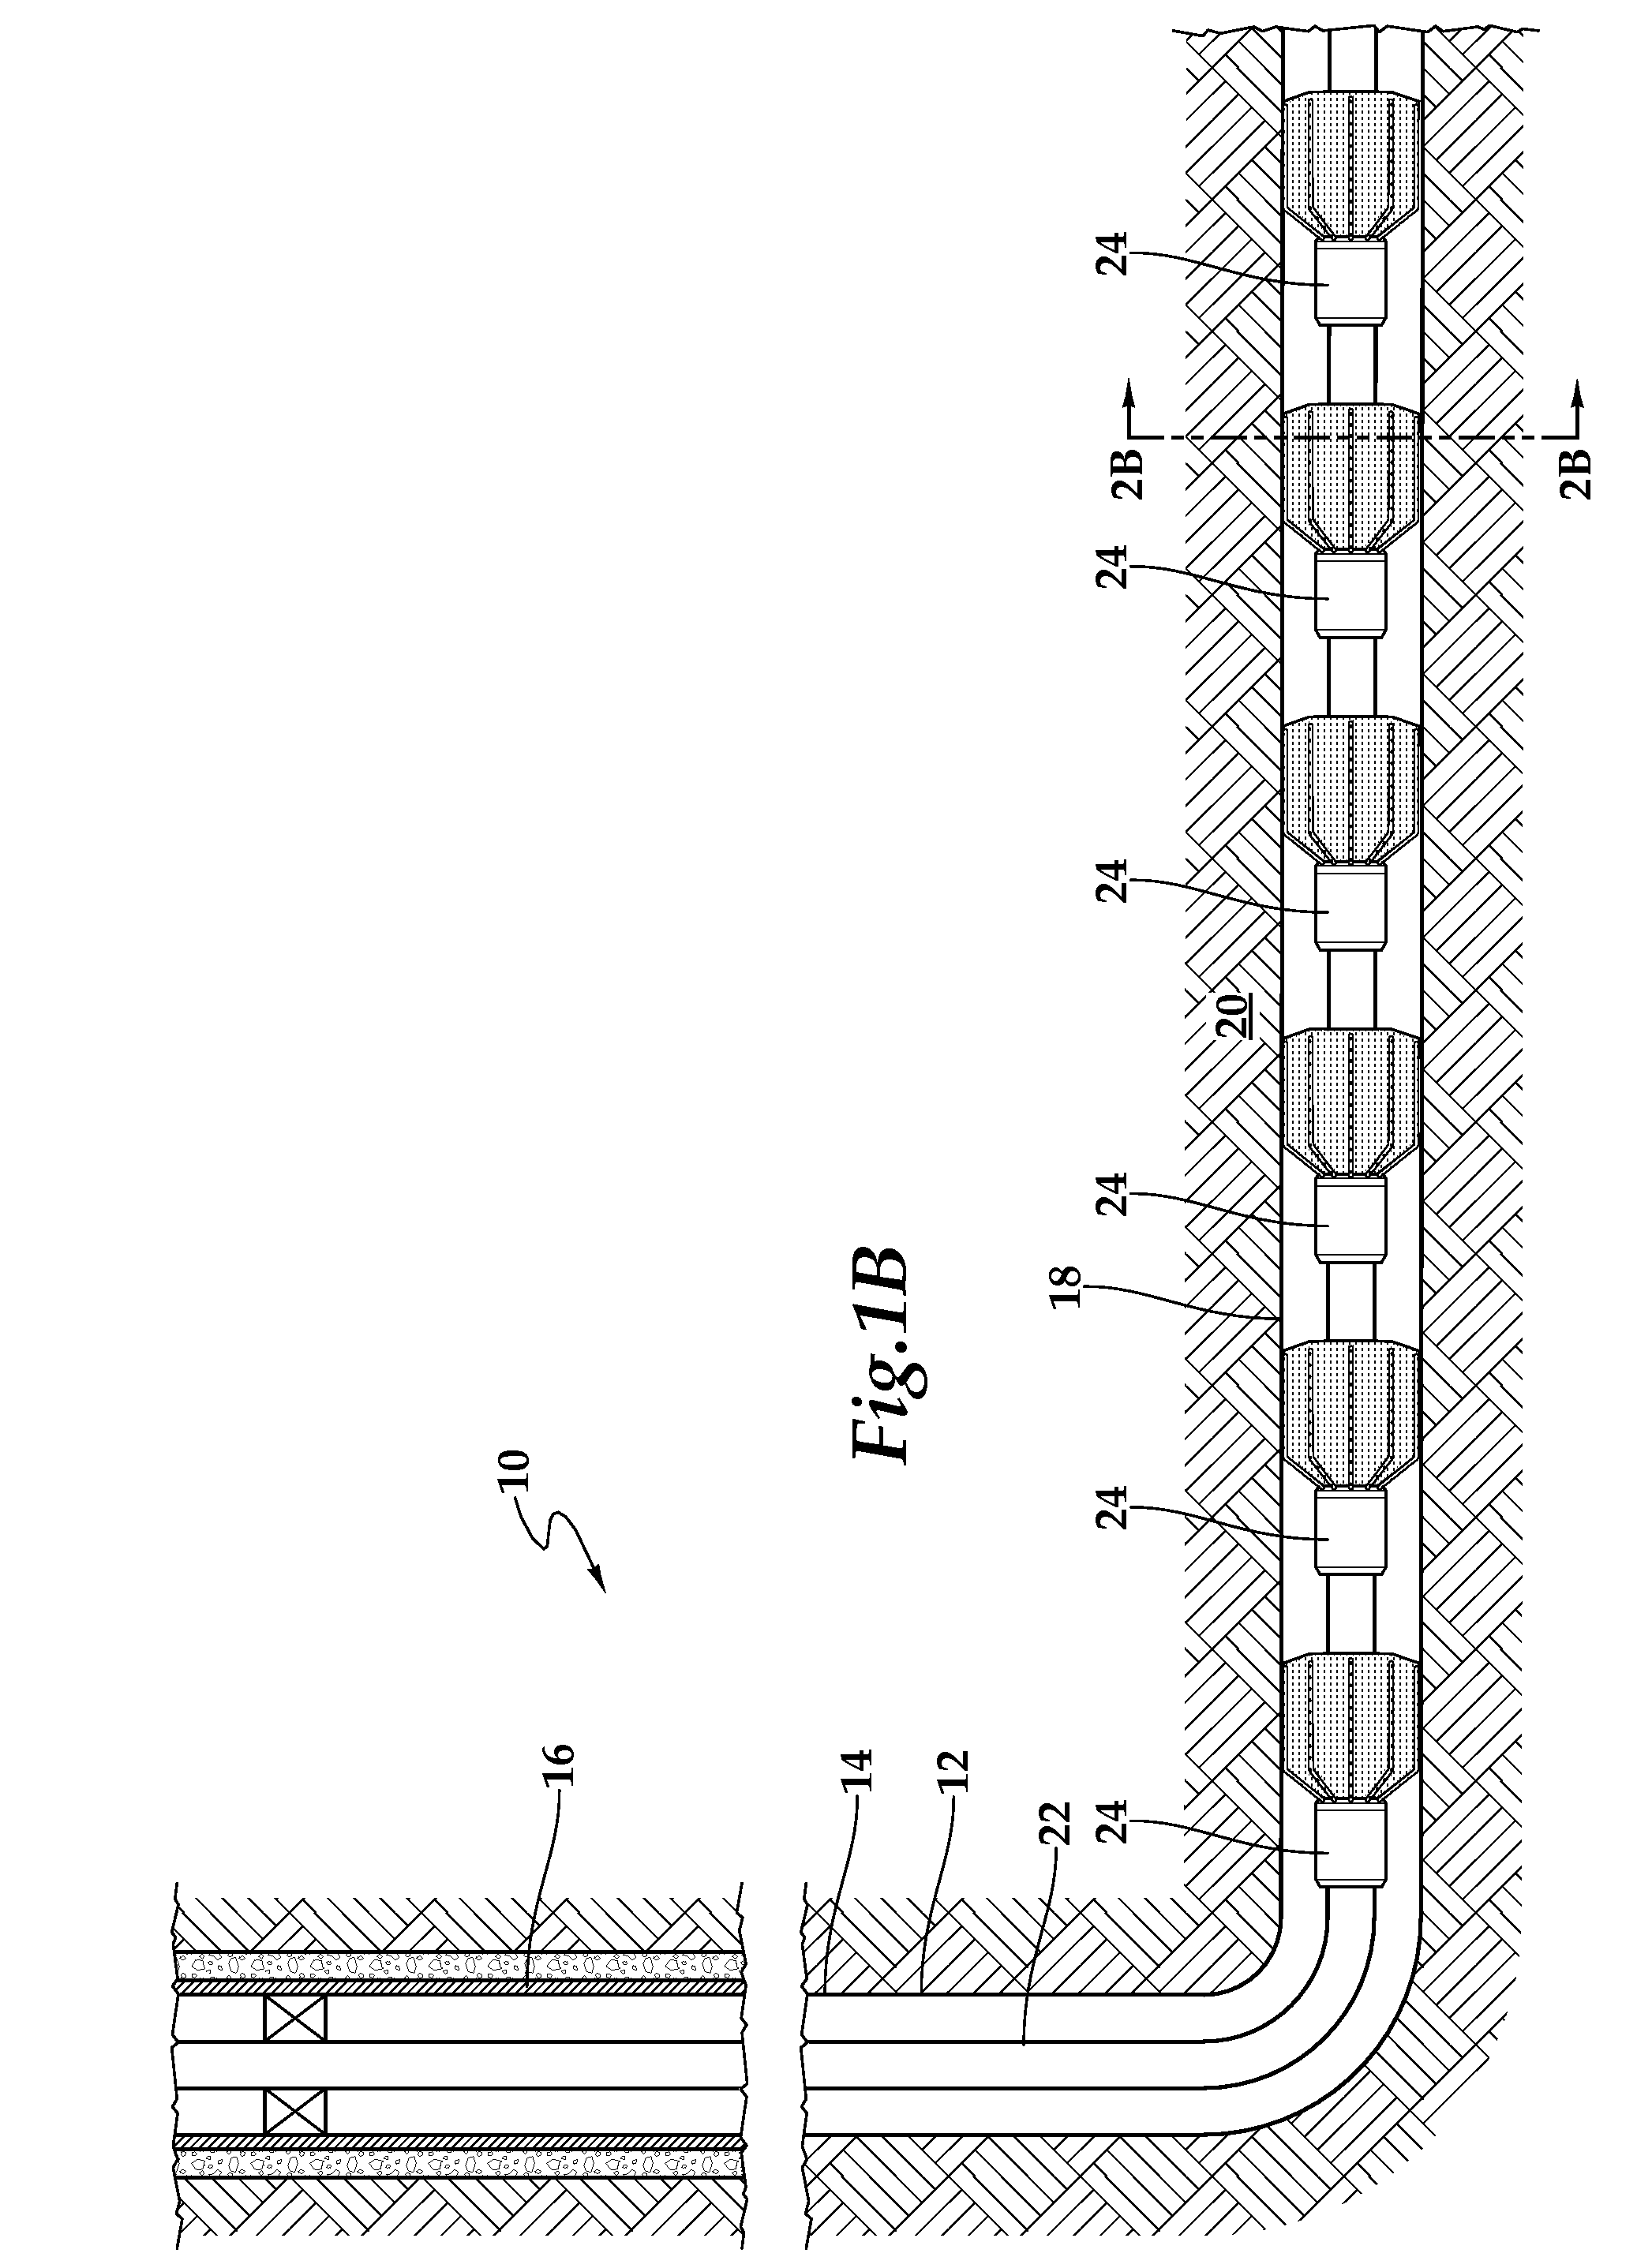 Sand control screen assembly and method for use of same